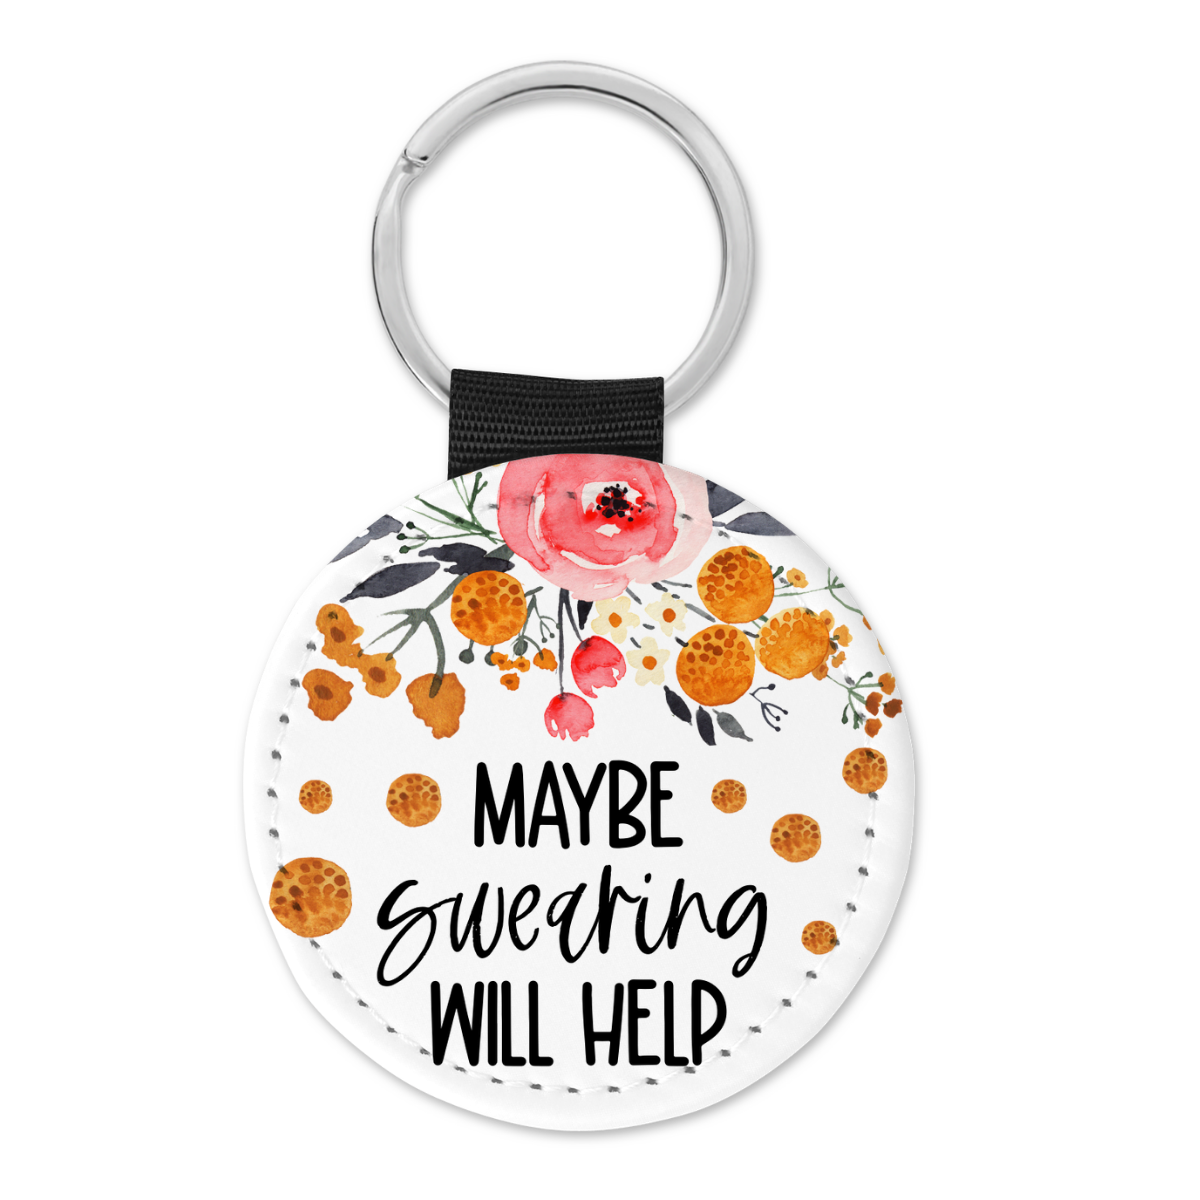 Maybe Swearing Will Help | Keyring - The Pretty Things.ca